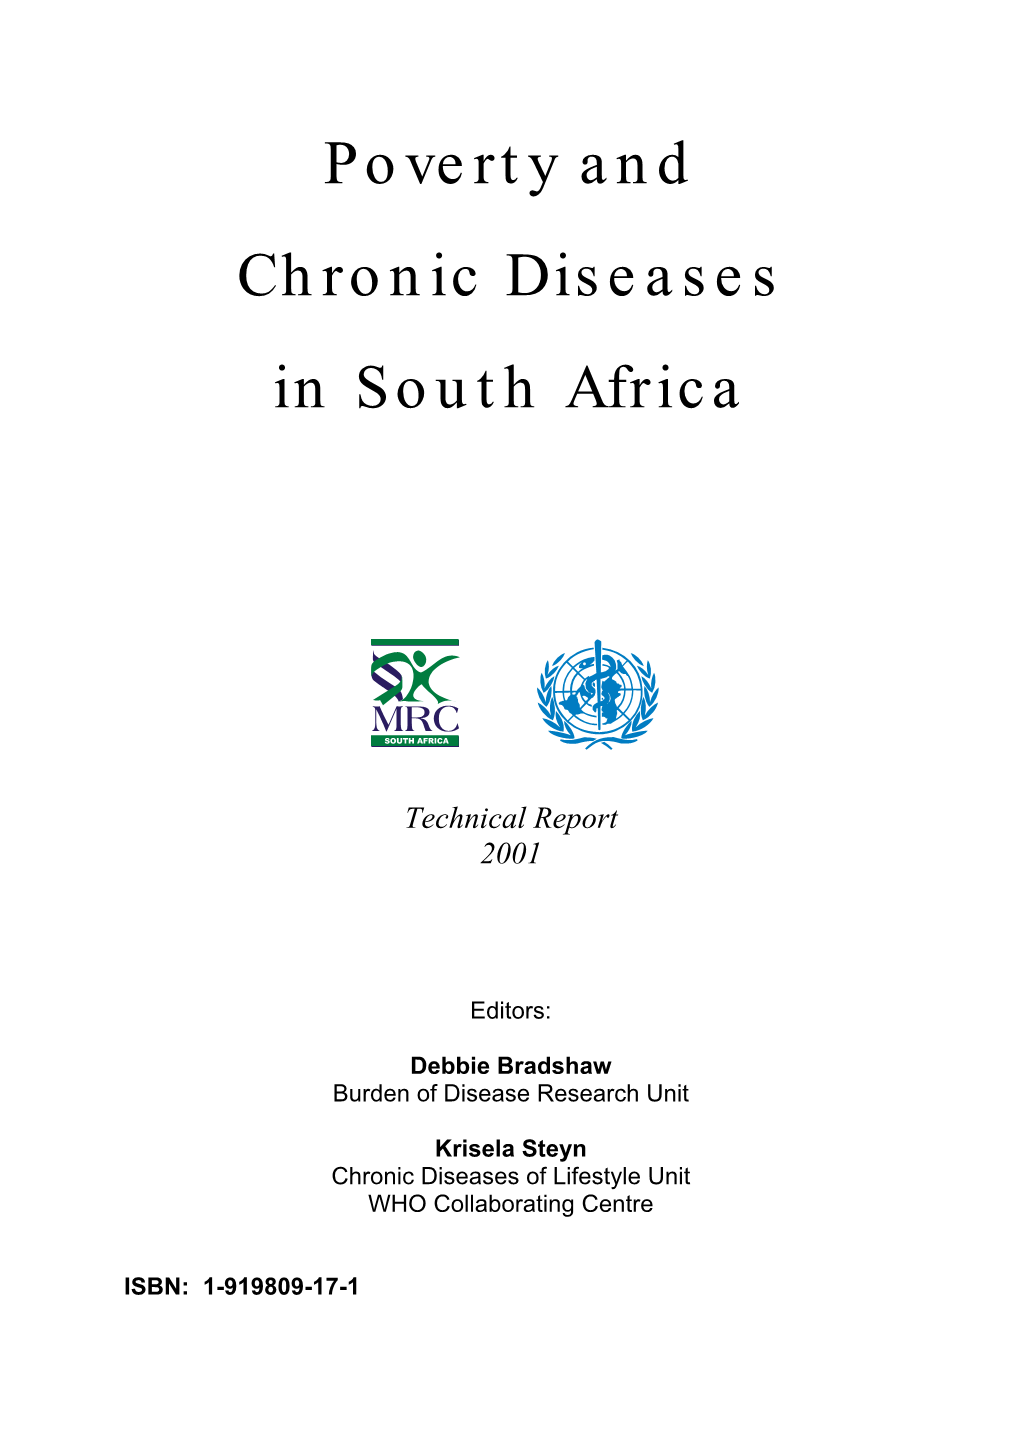 Poverty and Chronic Diseases in South Africa